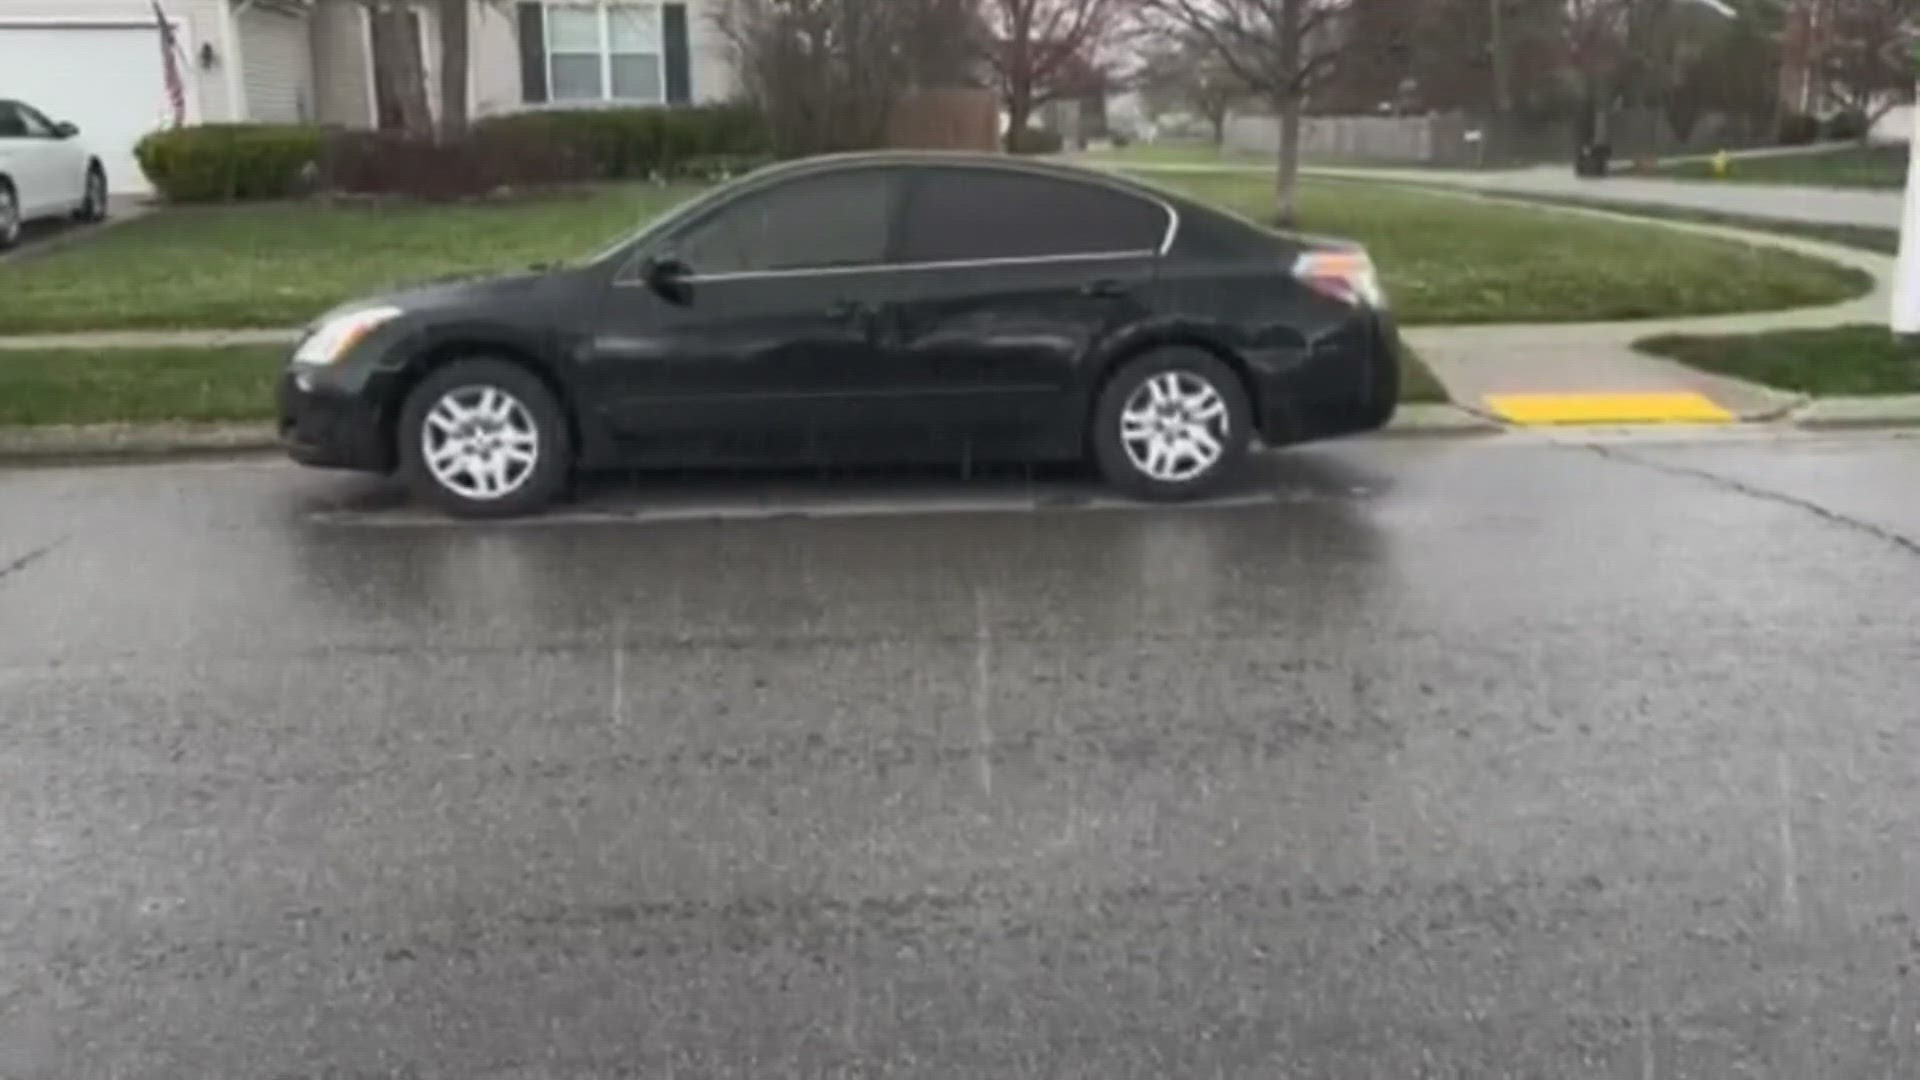 Kevin Landers breaks down tips on how you can protect your vehicle when the hail falls during severe weather.